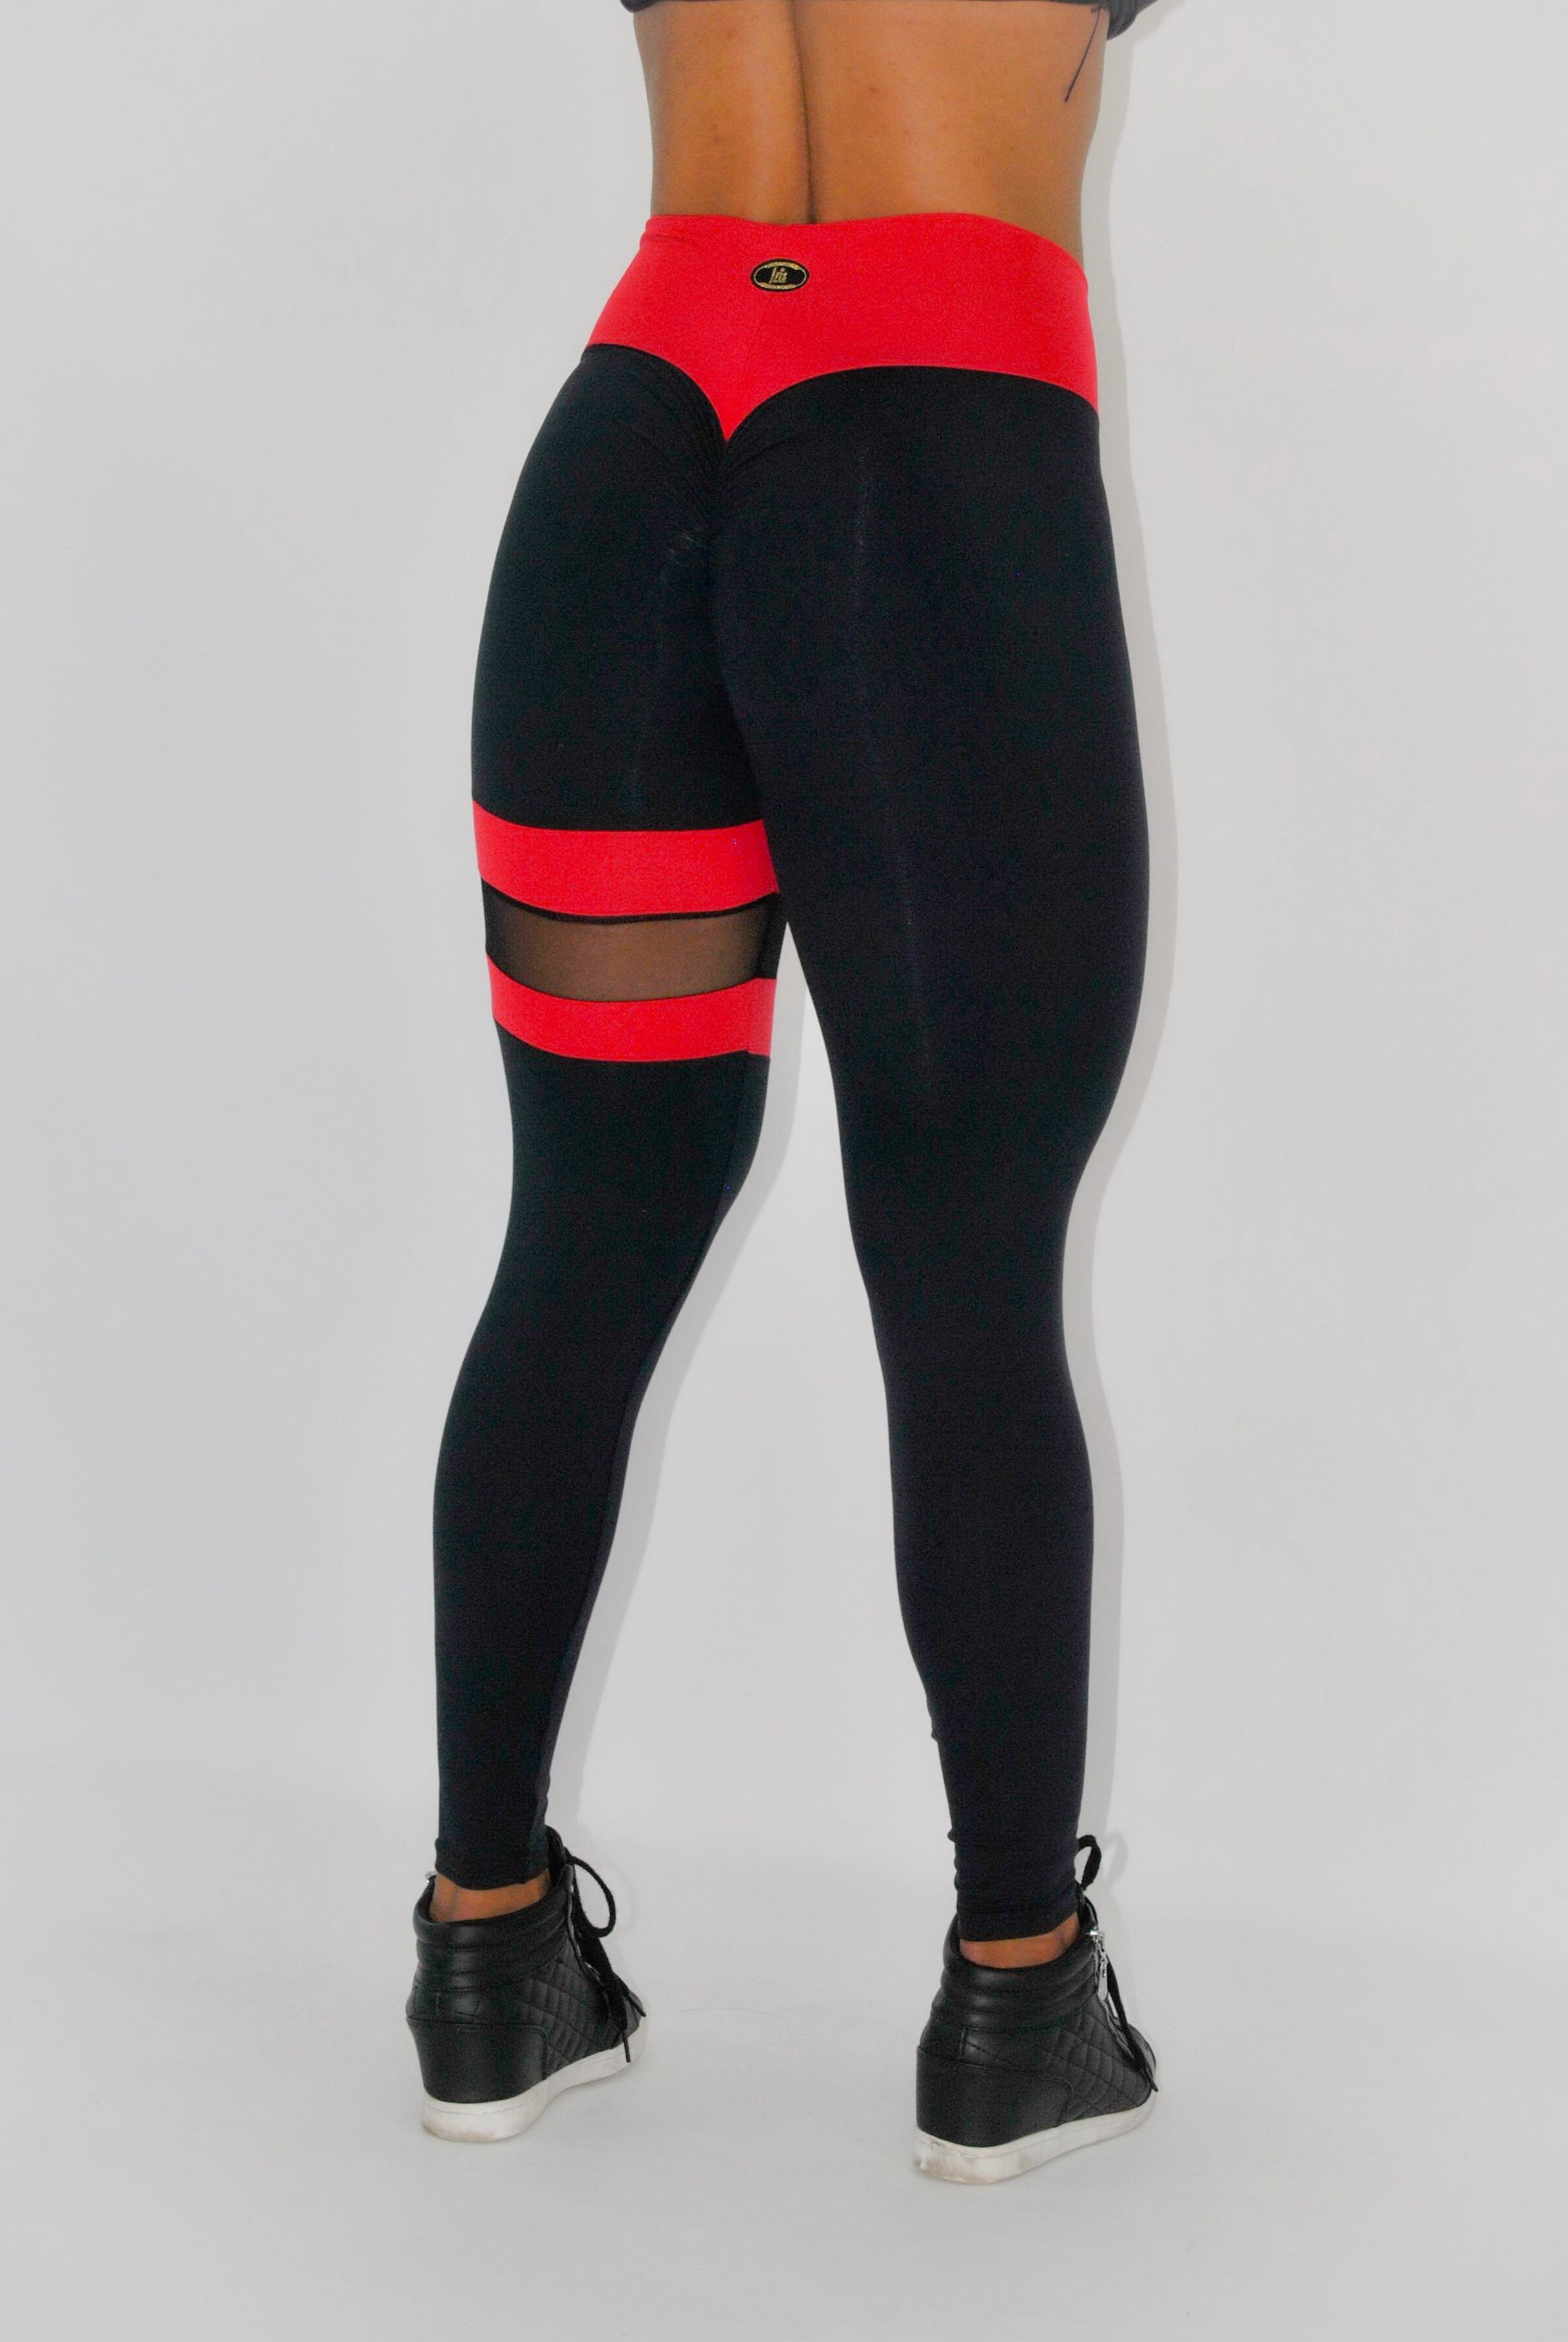 BUTT SCRUNCH LEG BAND RED AND BLACK LEGGINGS - Iris Fitness home of good quality leggings with really good prices